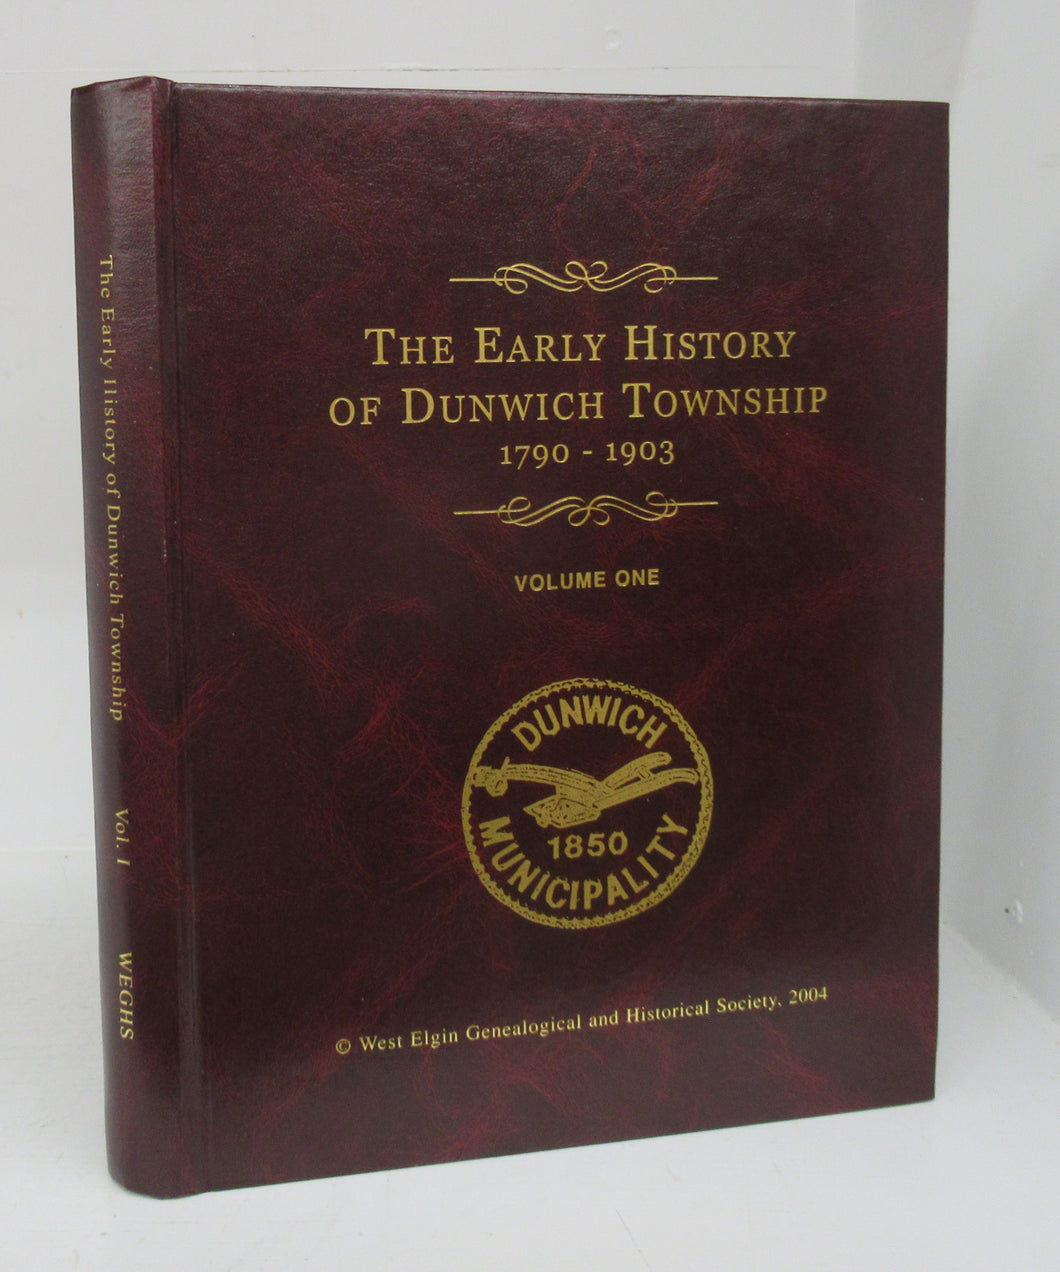 The Early History of Dunwich Township 1790-1903. Volume One